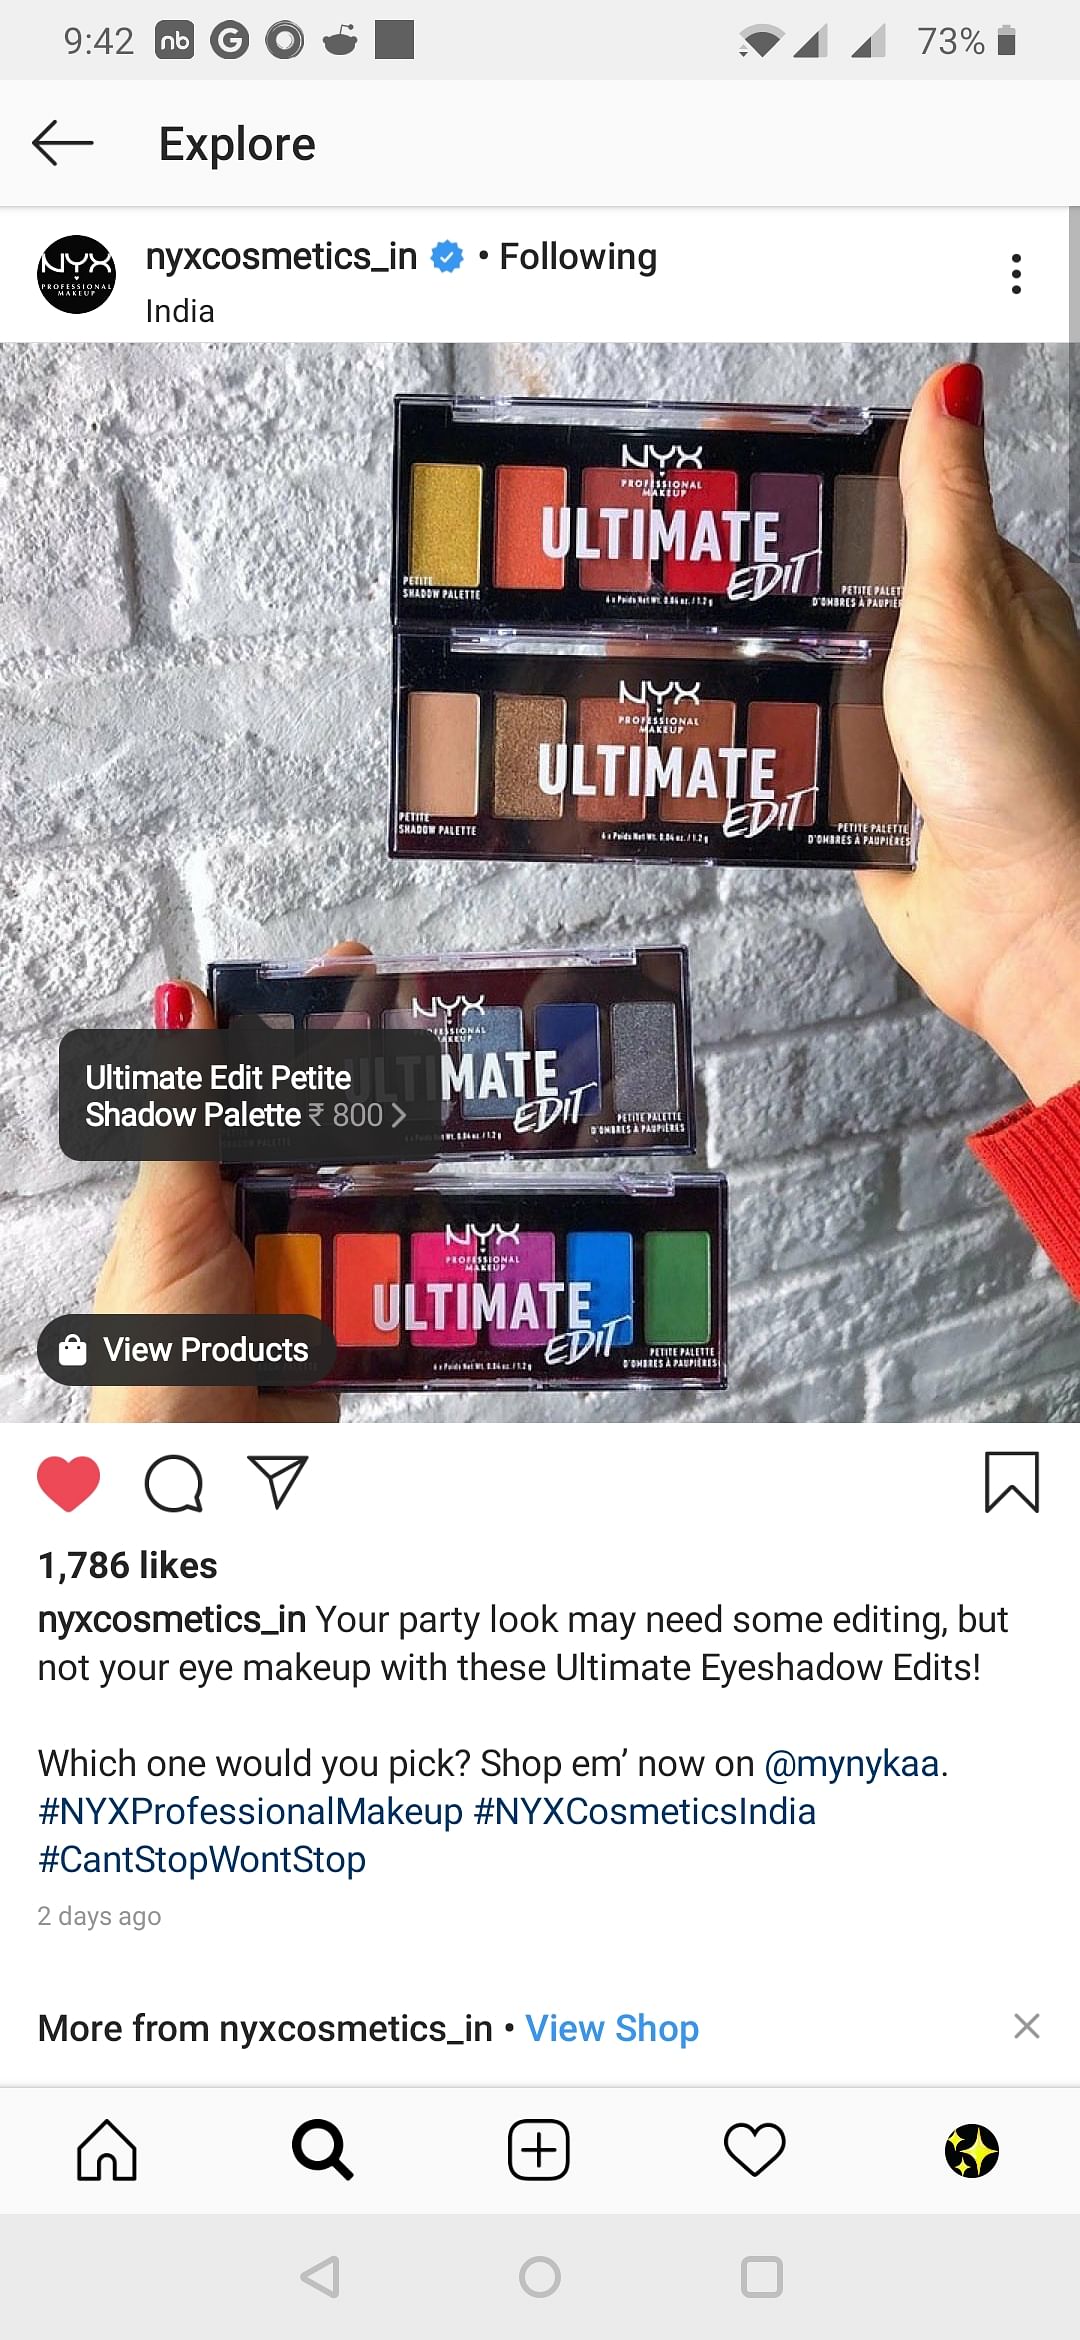 The product is tagged in this post